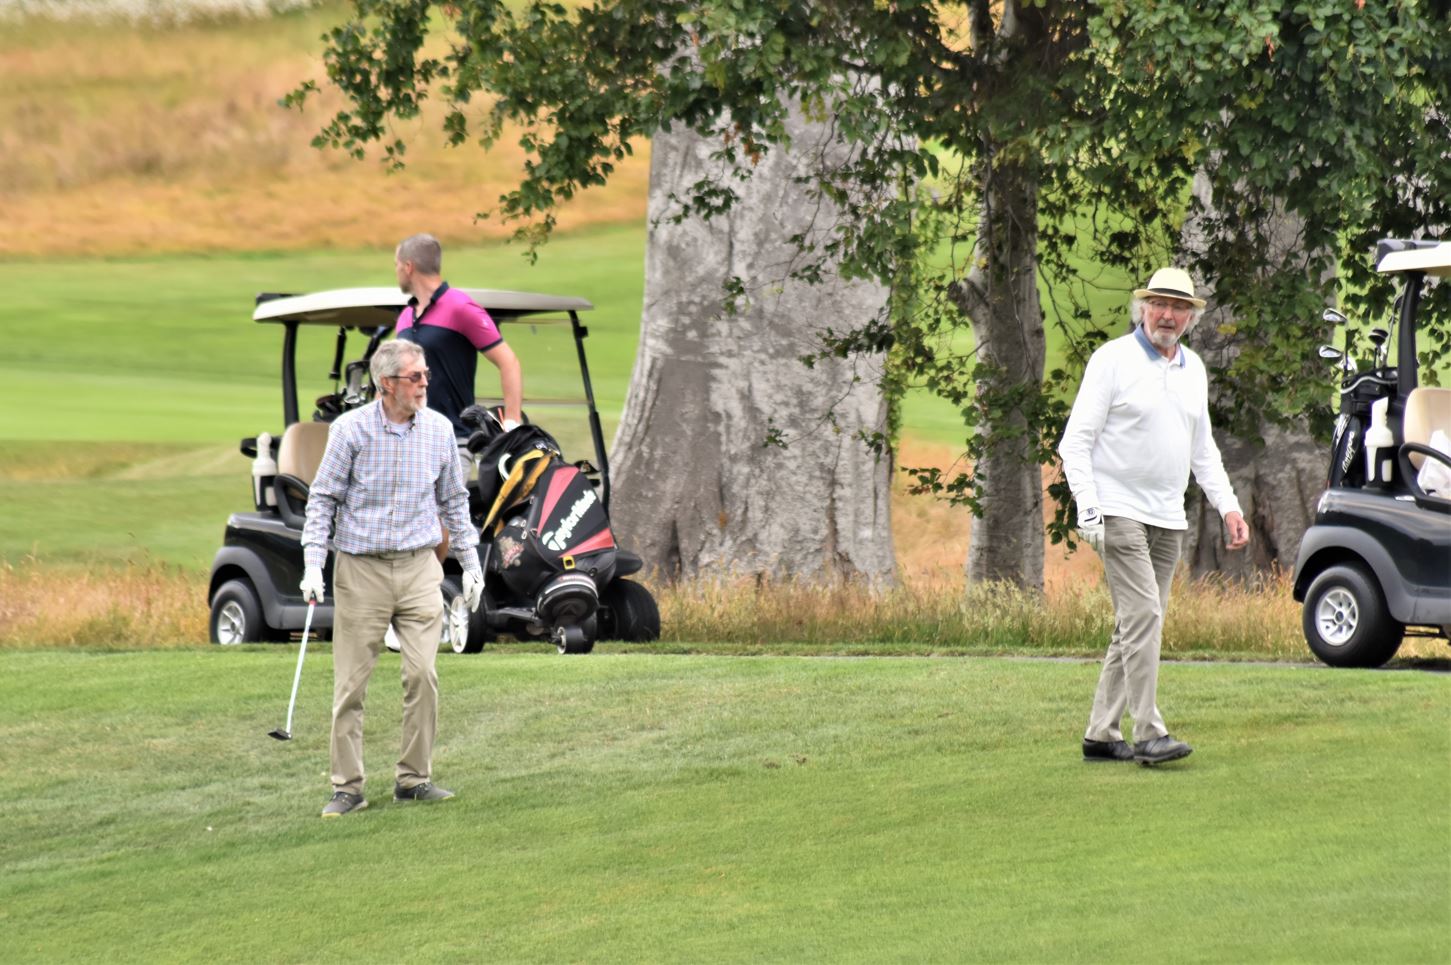 “Great success” at Lions Club Ireland charity Golf Classic